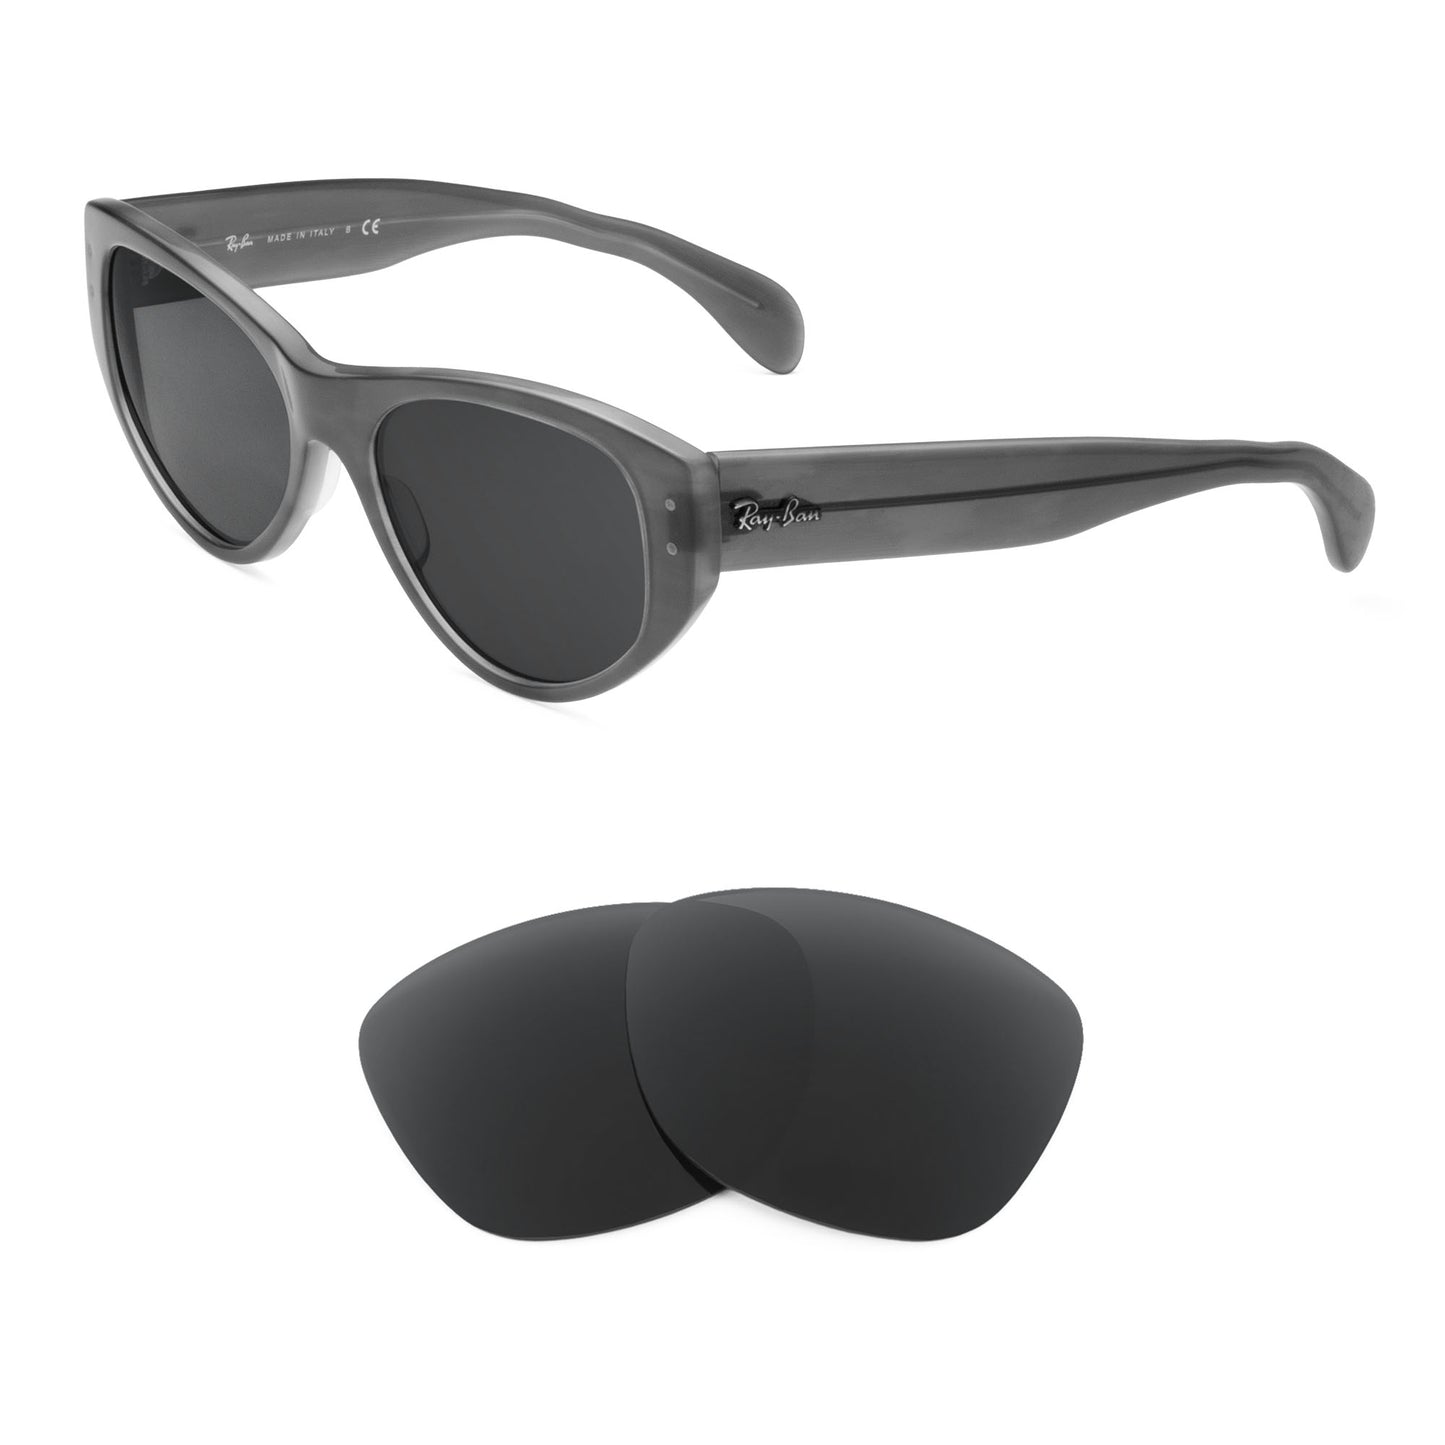 Ray-Ban Vagabond RB4152 sunglasses with replacement lenses